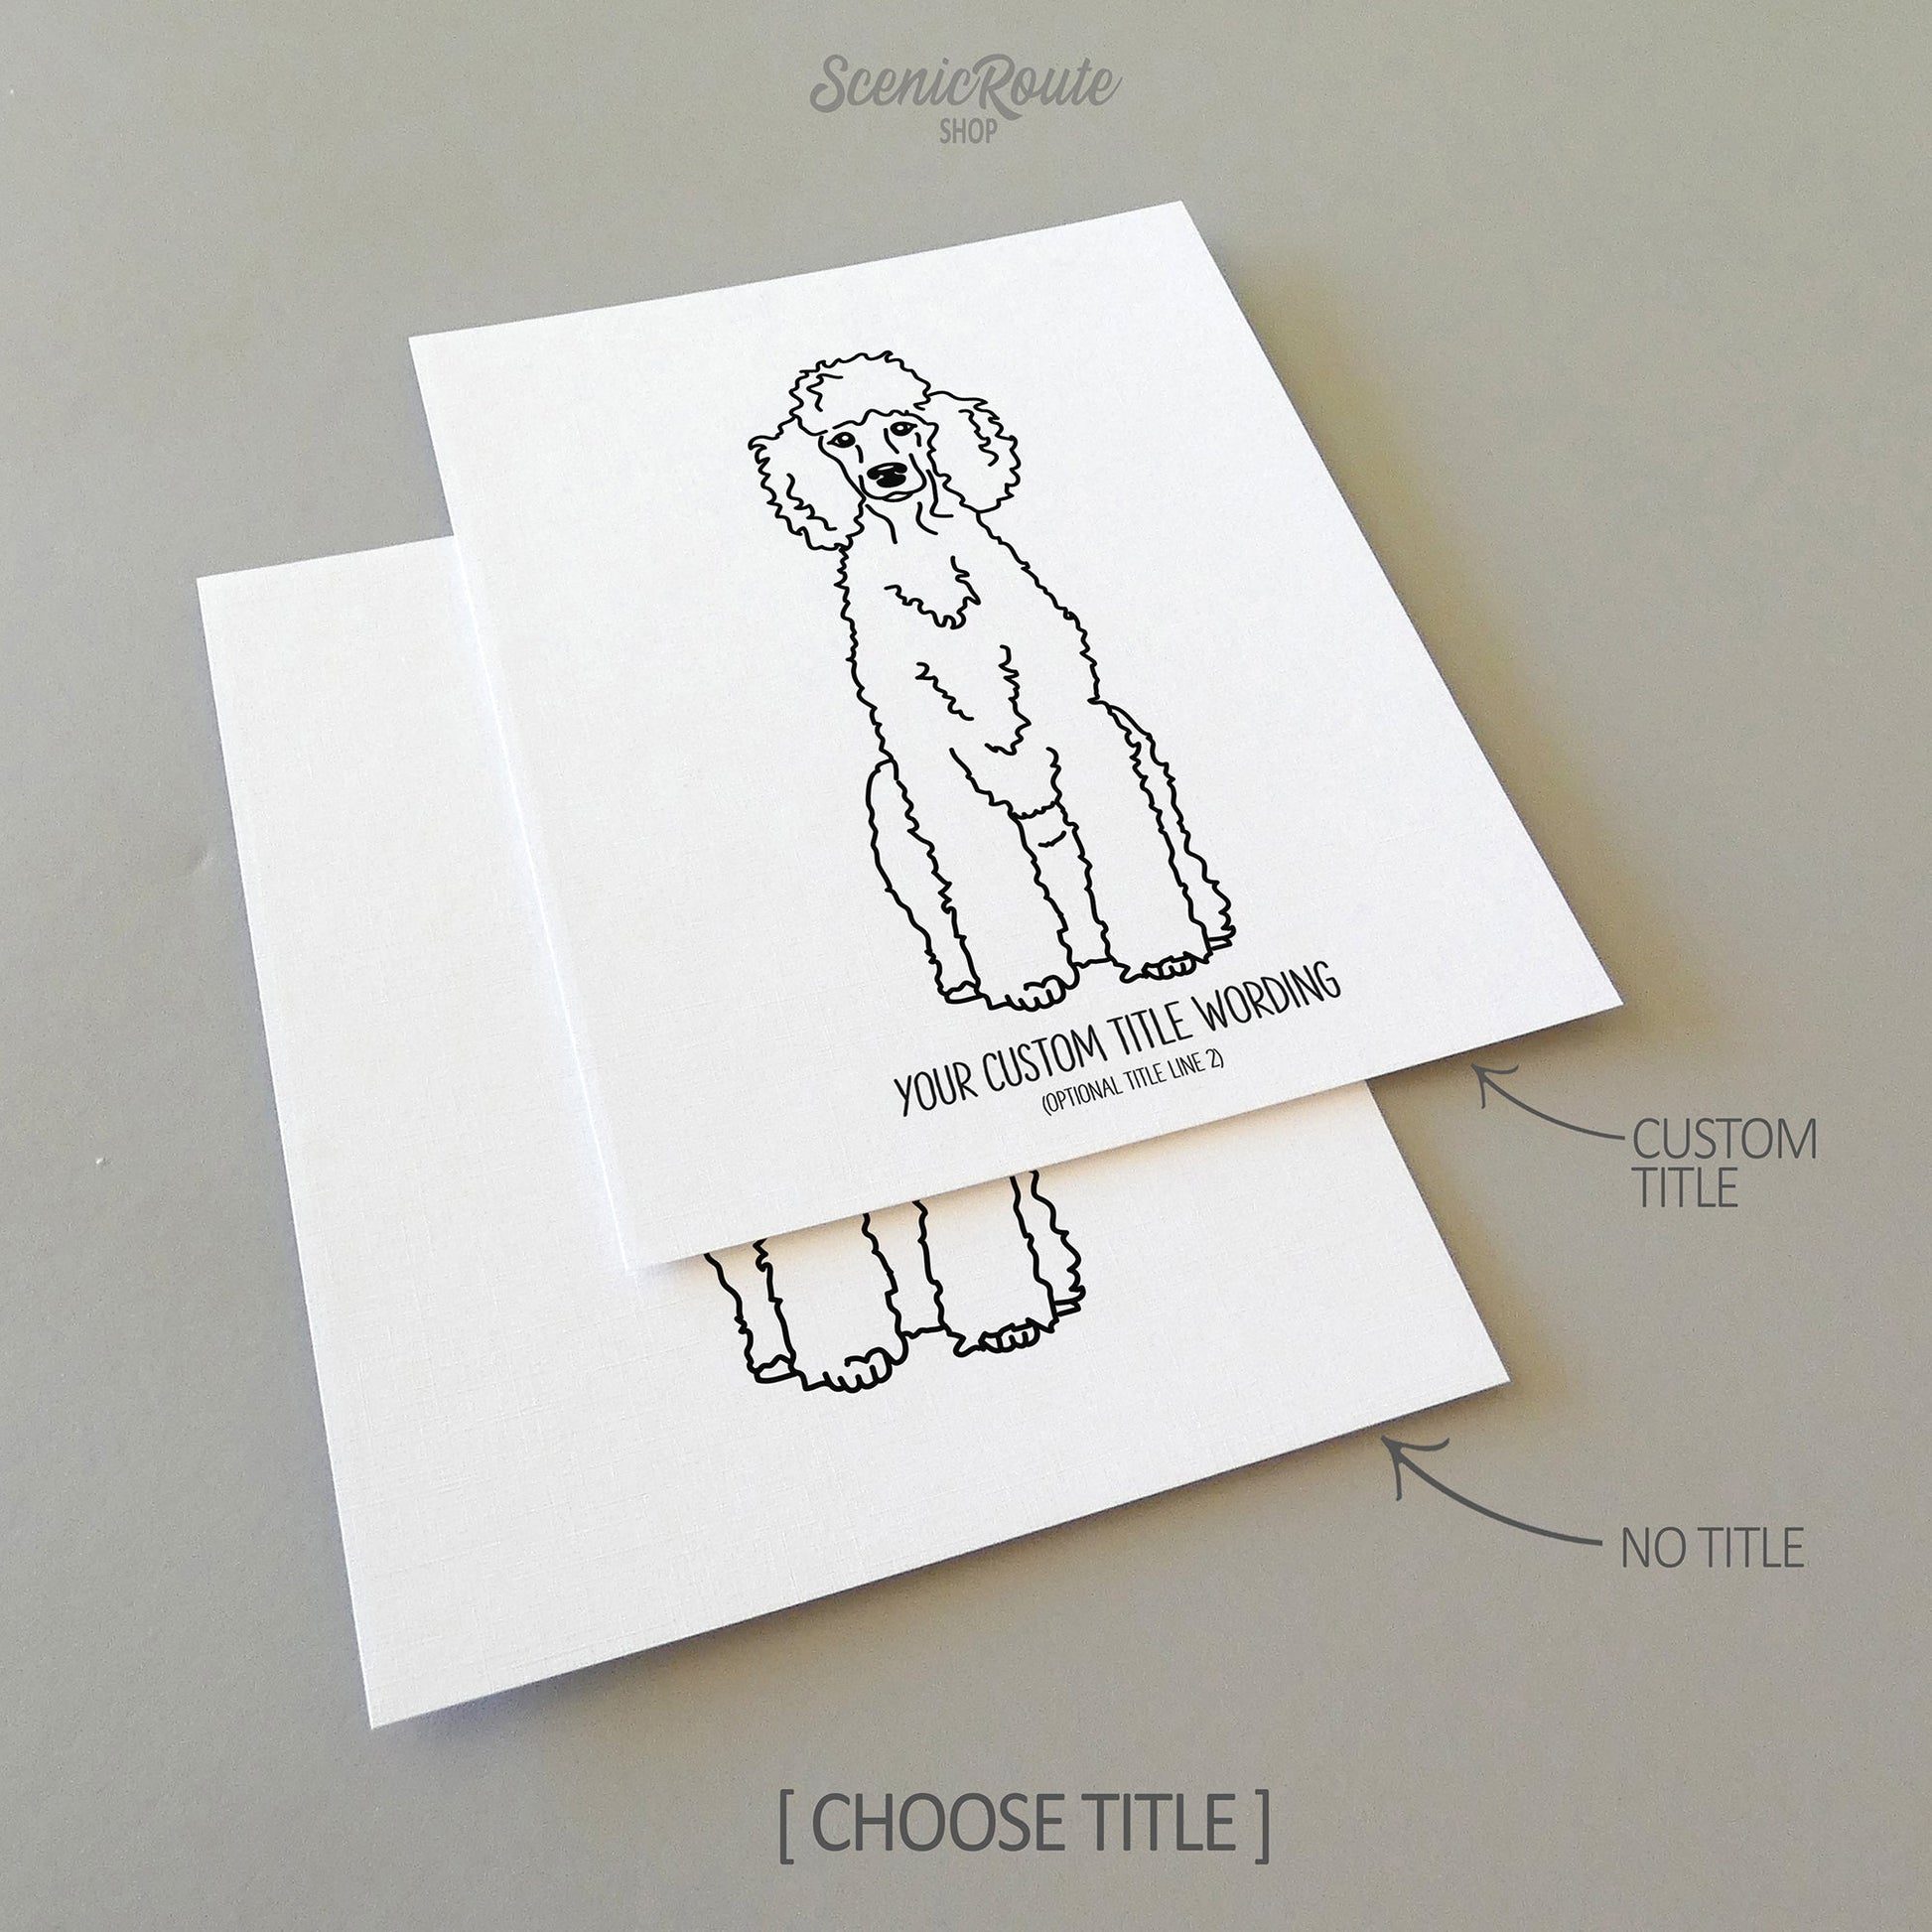 Two line art drawings of a Poodle dog on white linen paper with a gray background.  The pieces are shown with “No Title” and “Custom Title” options for the available art print options.